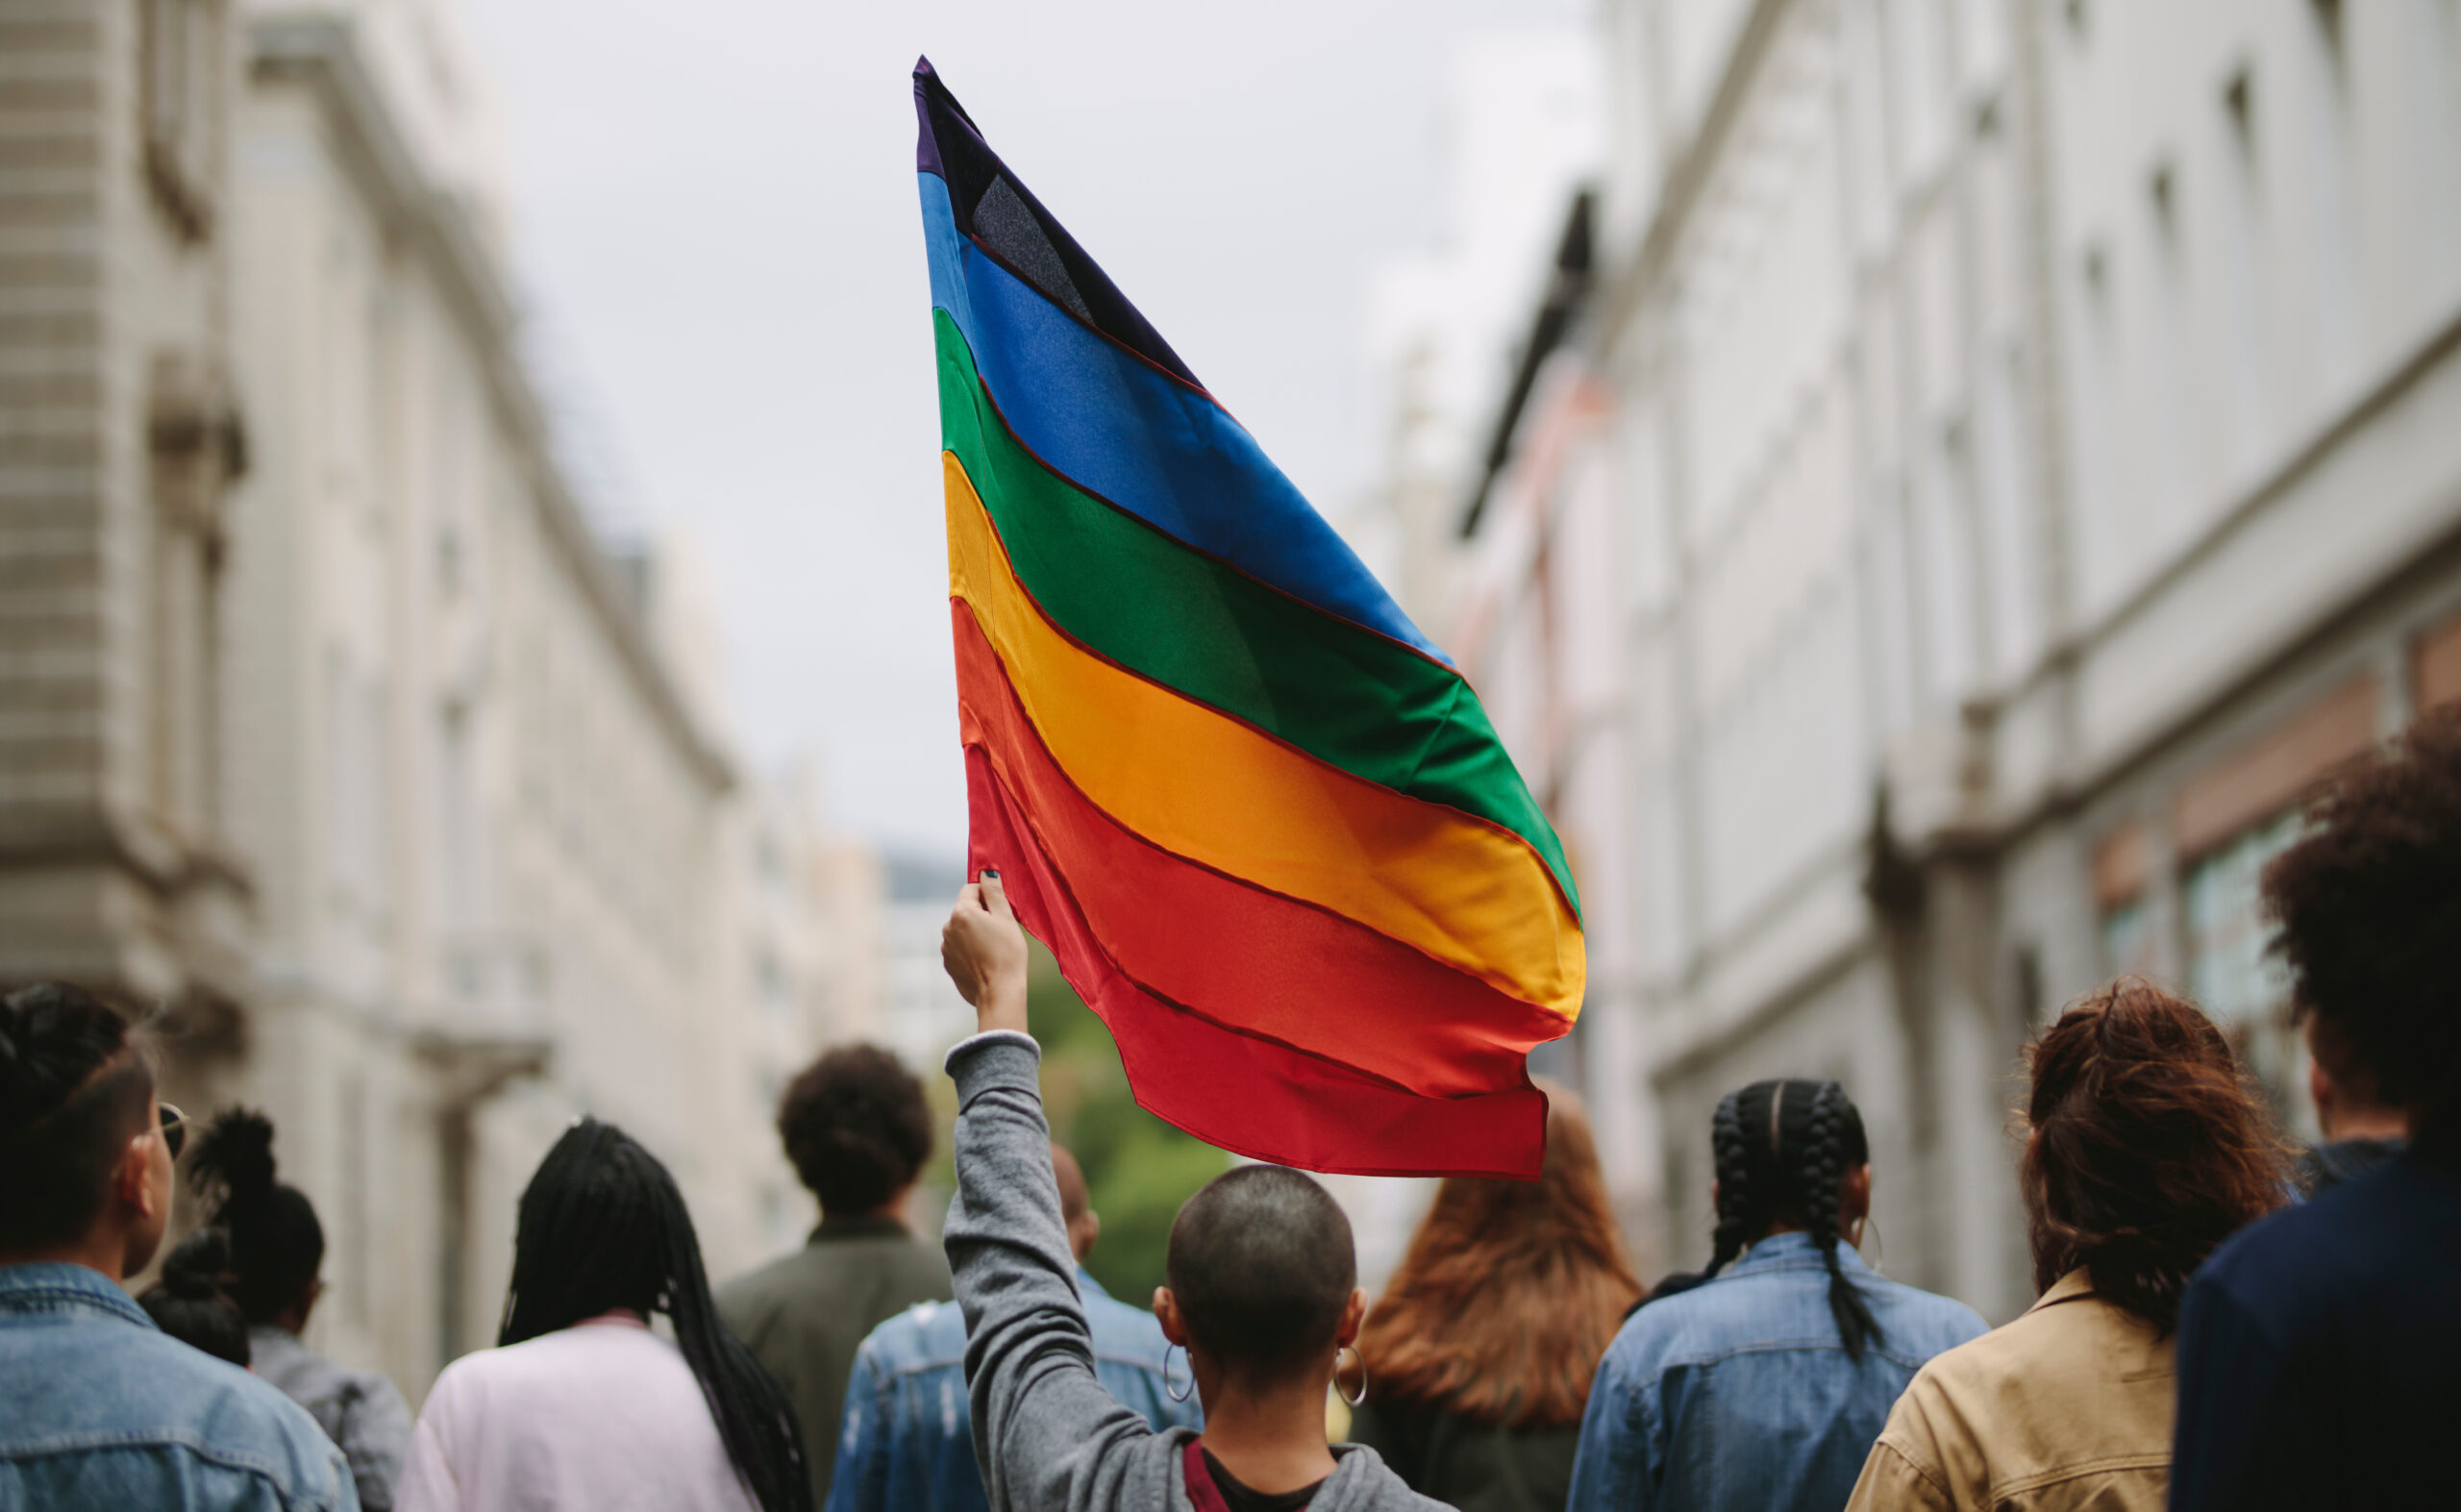 Campus Safety for LGBTQ Students